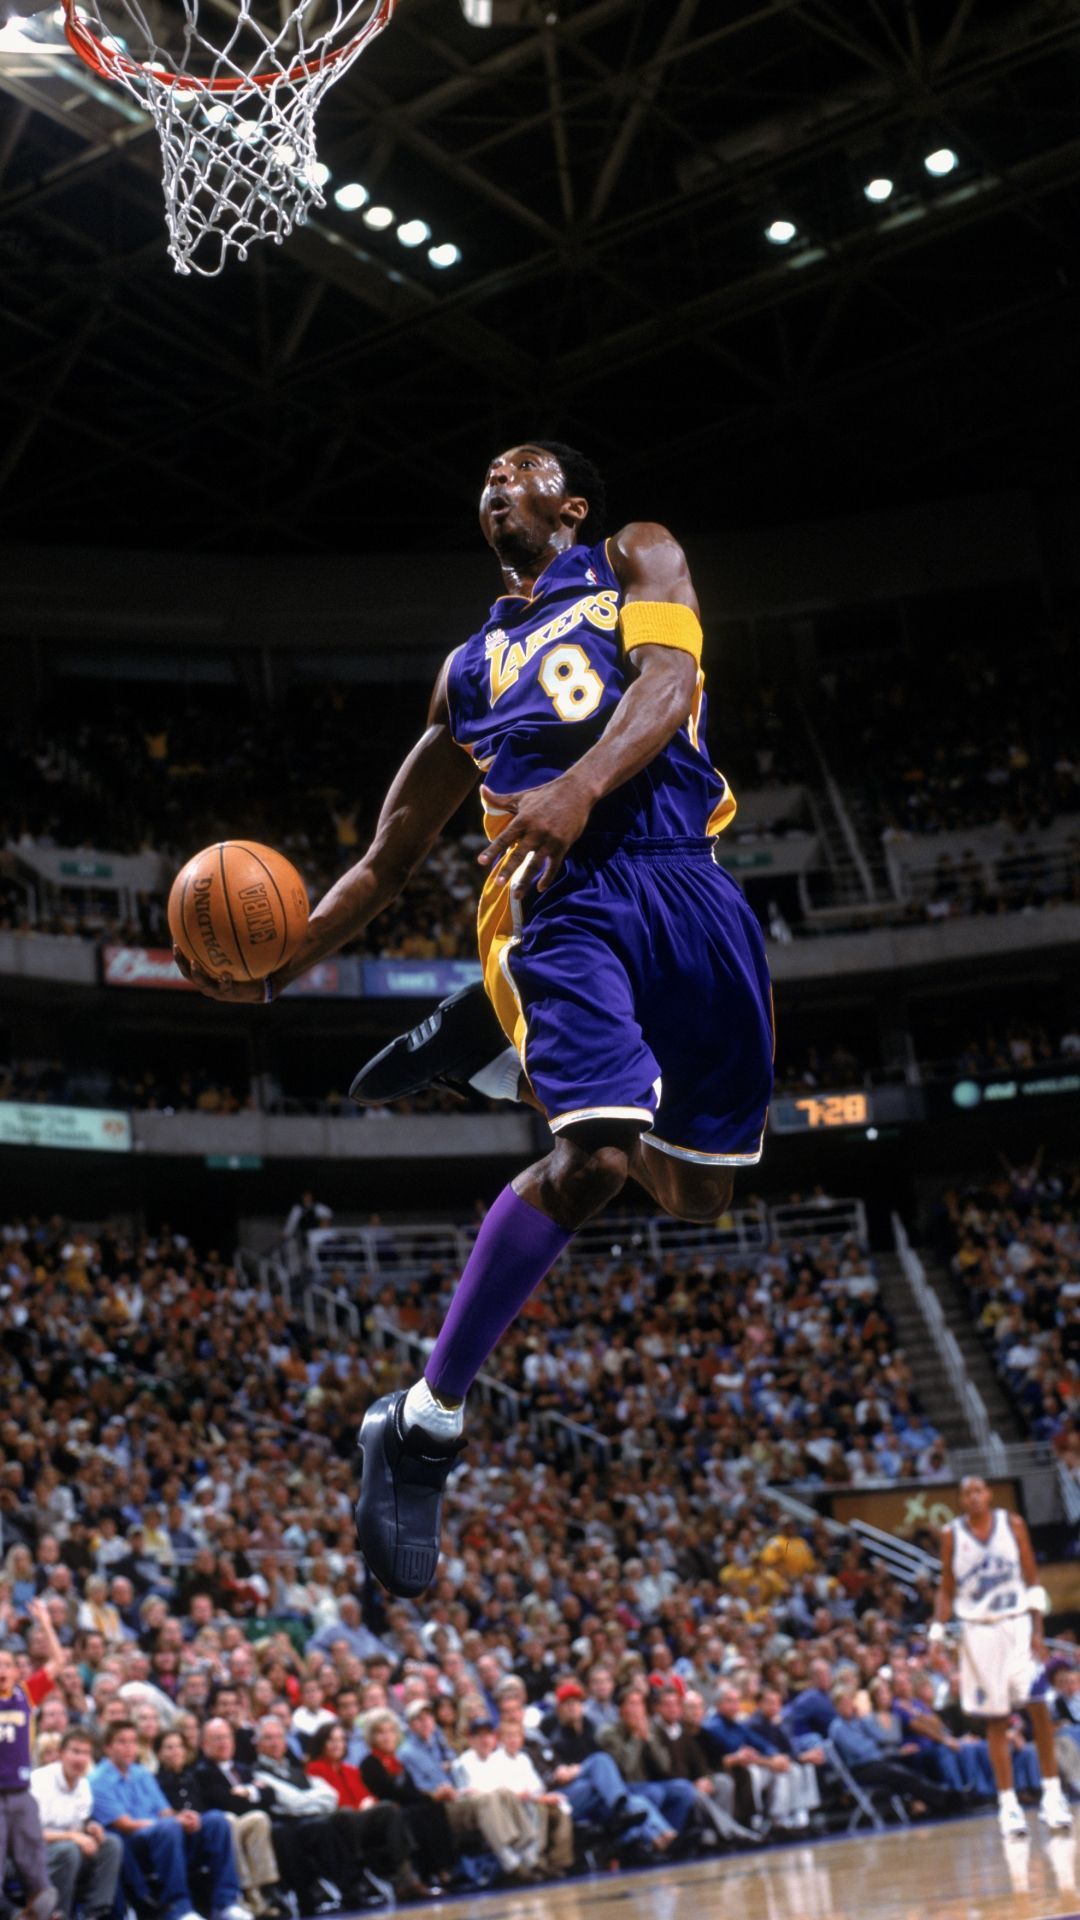 Kobe Bryant in the air with the ball in hand - Kobe Bryant